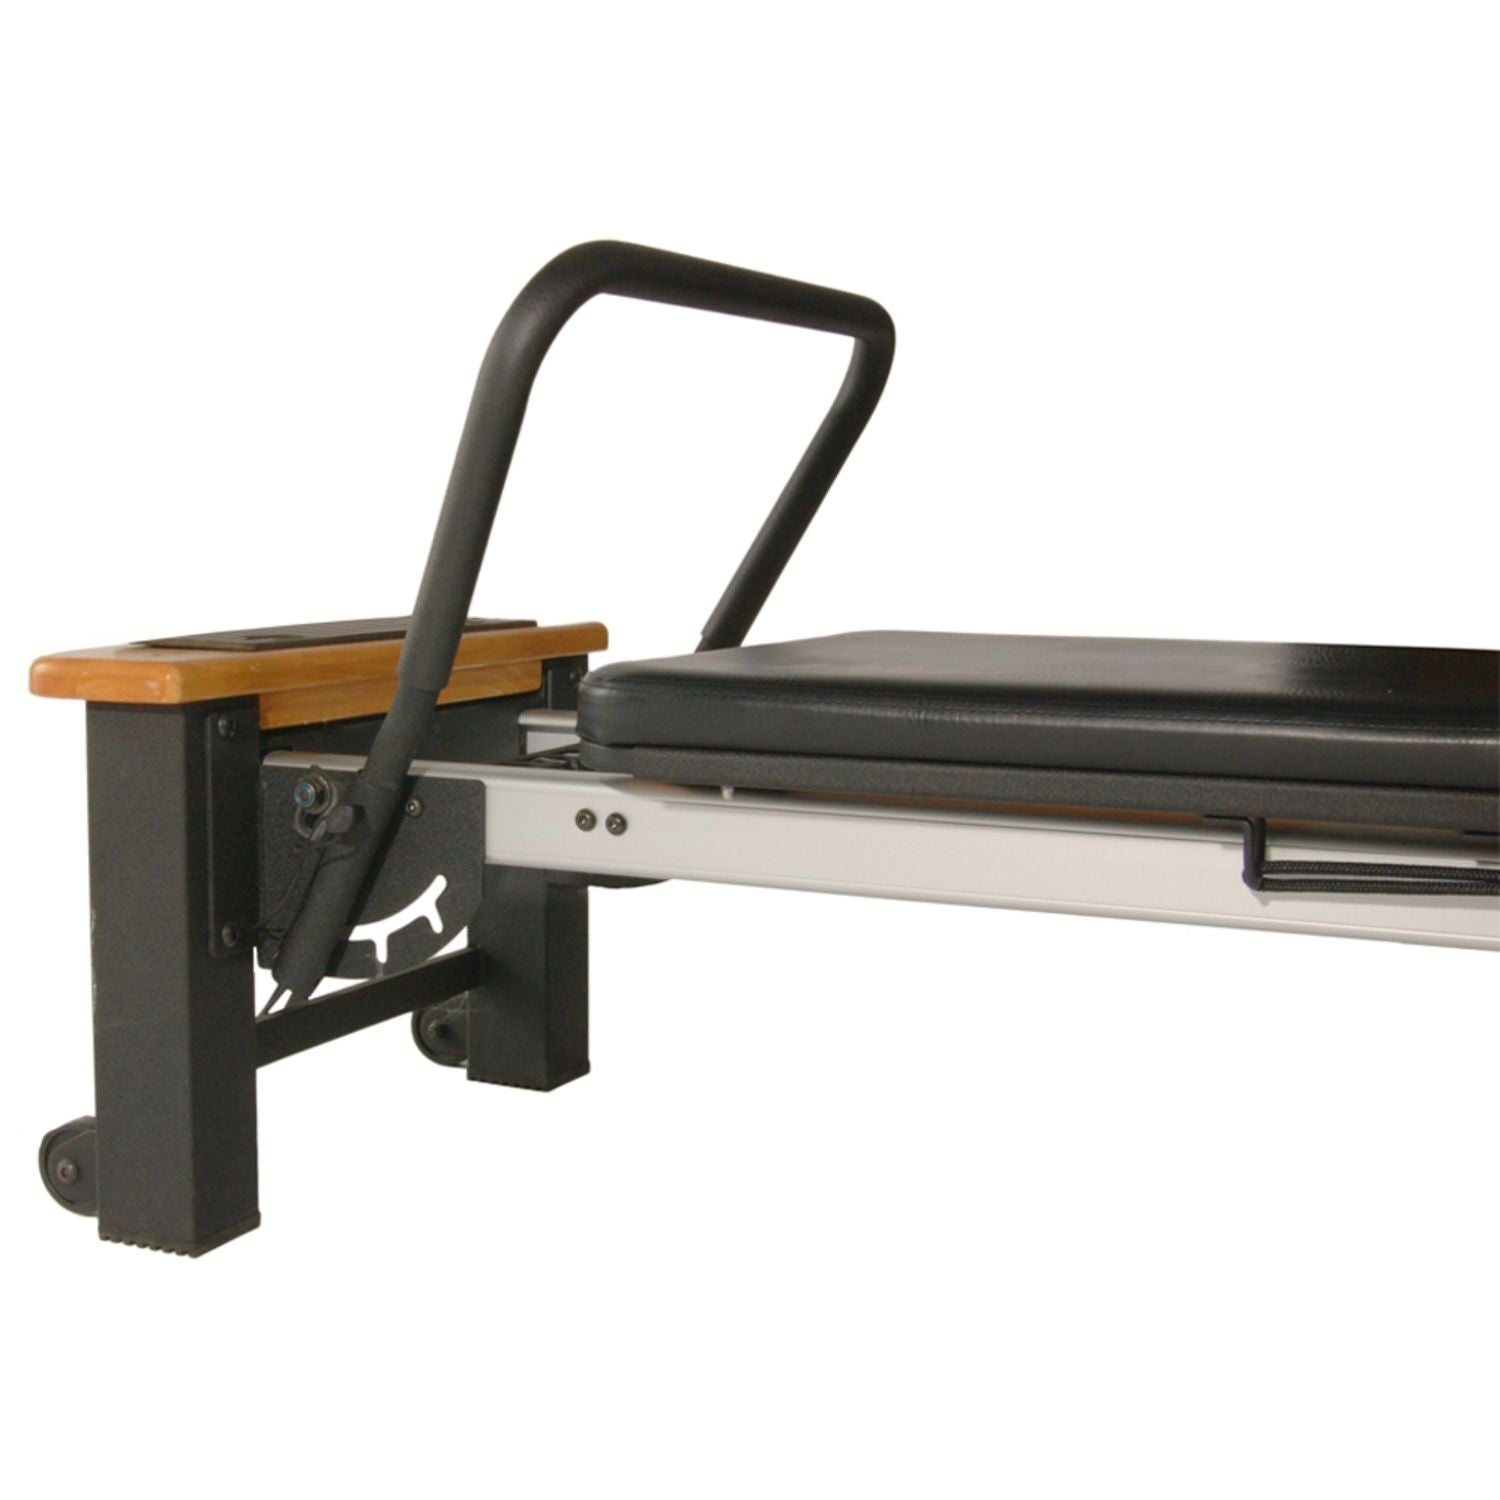  AeroPilates Reformer 266 - Pilates Reformer Workout Machine  for Home Gym - Cardio Fitness Rebounder- Up to 300 lbs Weight Capacity : Pilates  Reformer Rebounder : Sports & Outdoors